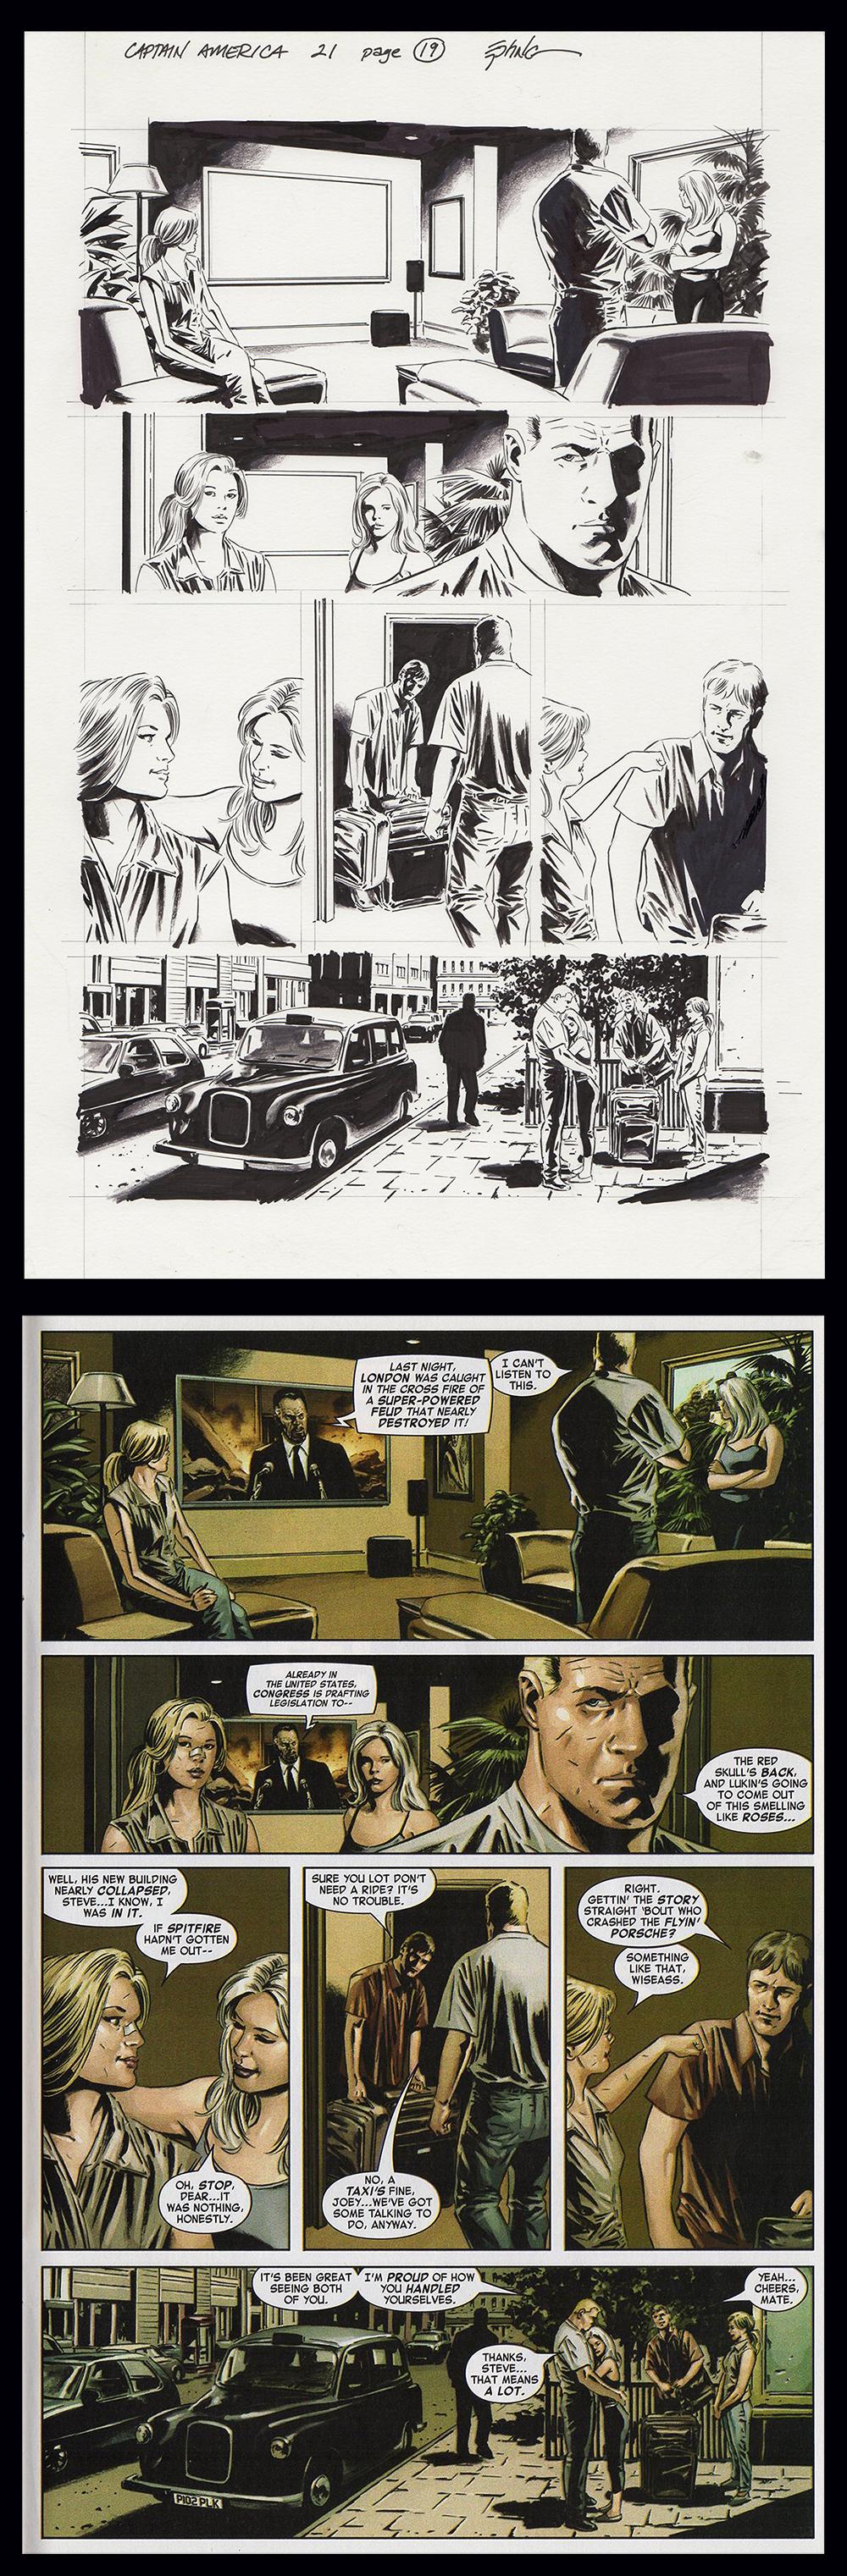 Image: Captain America Vol 5 #21 page 19 art by Steve Epting